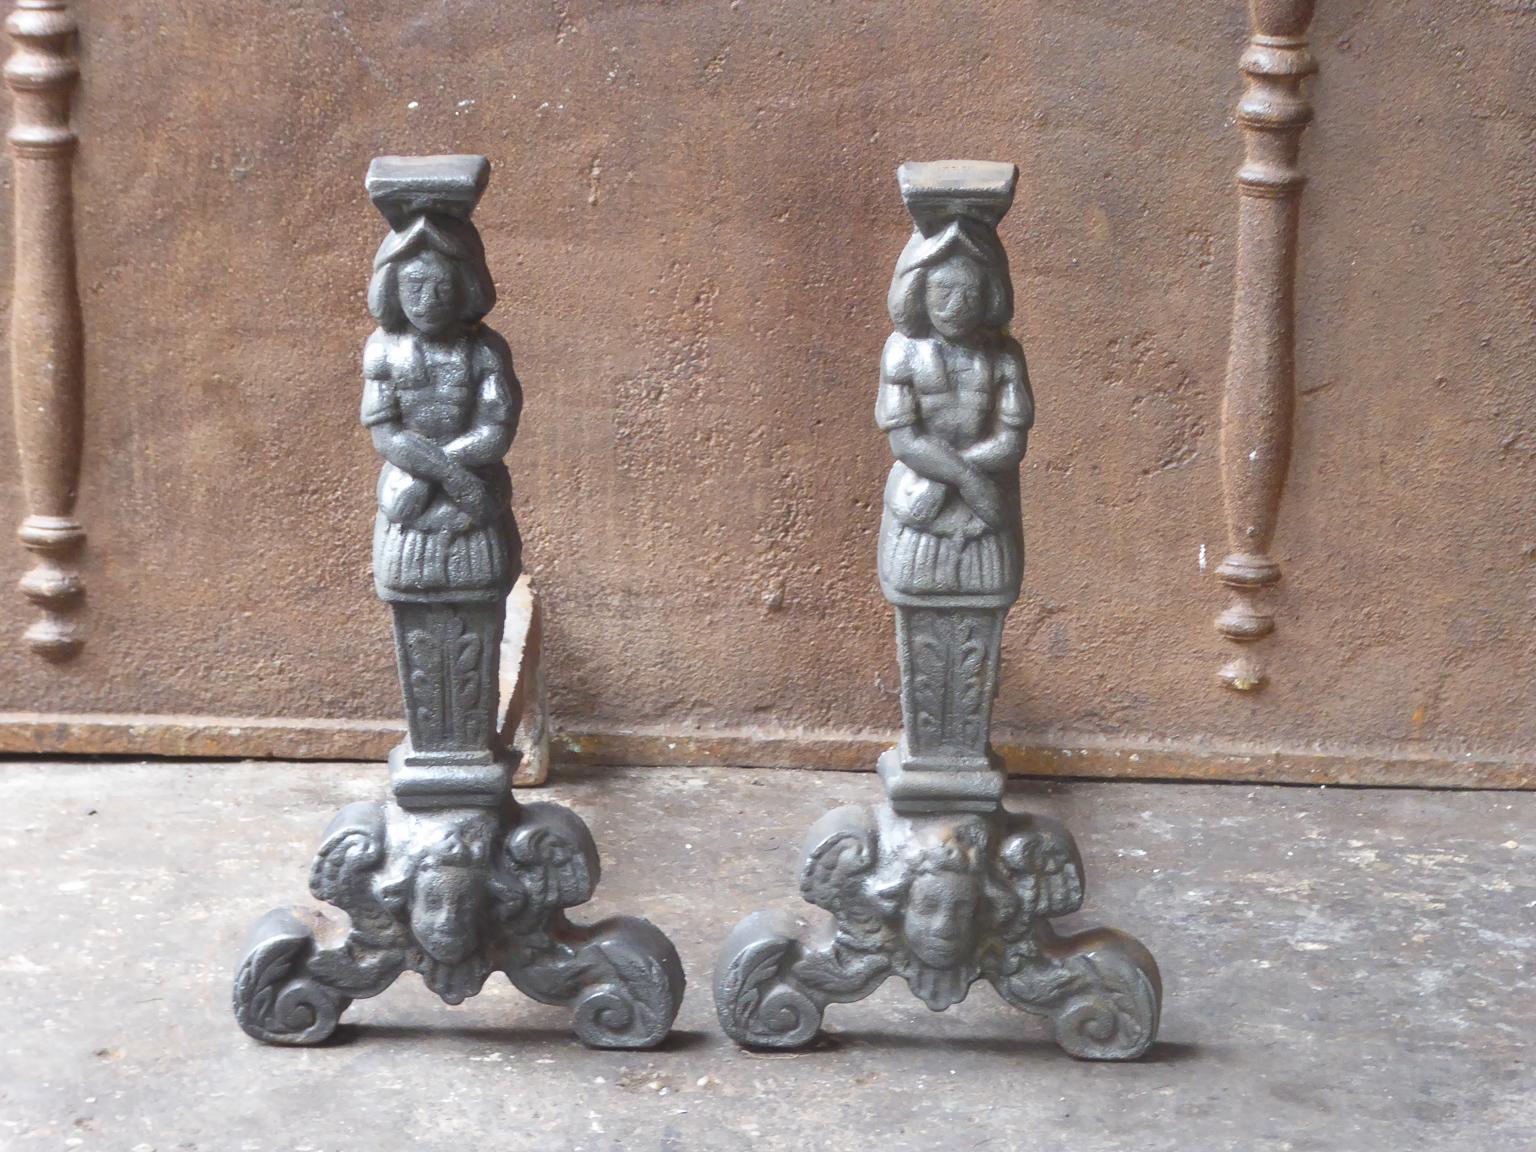 20th century French D'Artagnan firedogs made of cast iron. D'Artagnan is the best known hero of the three Musketeers.